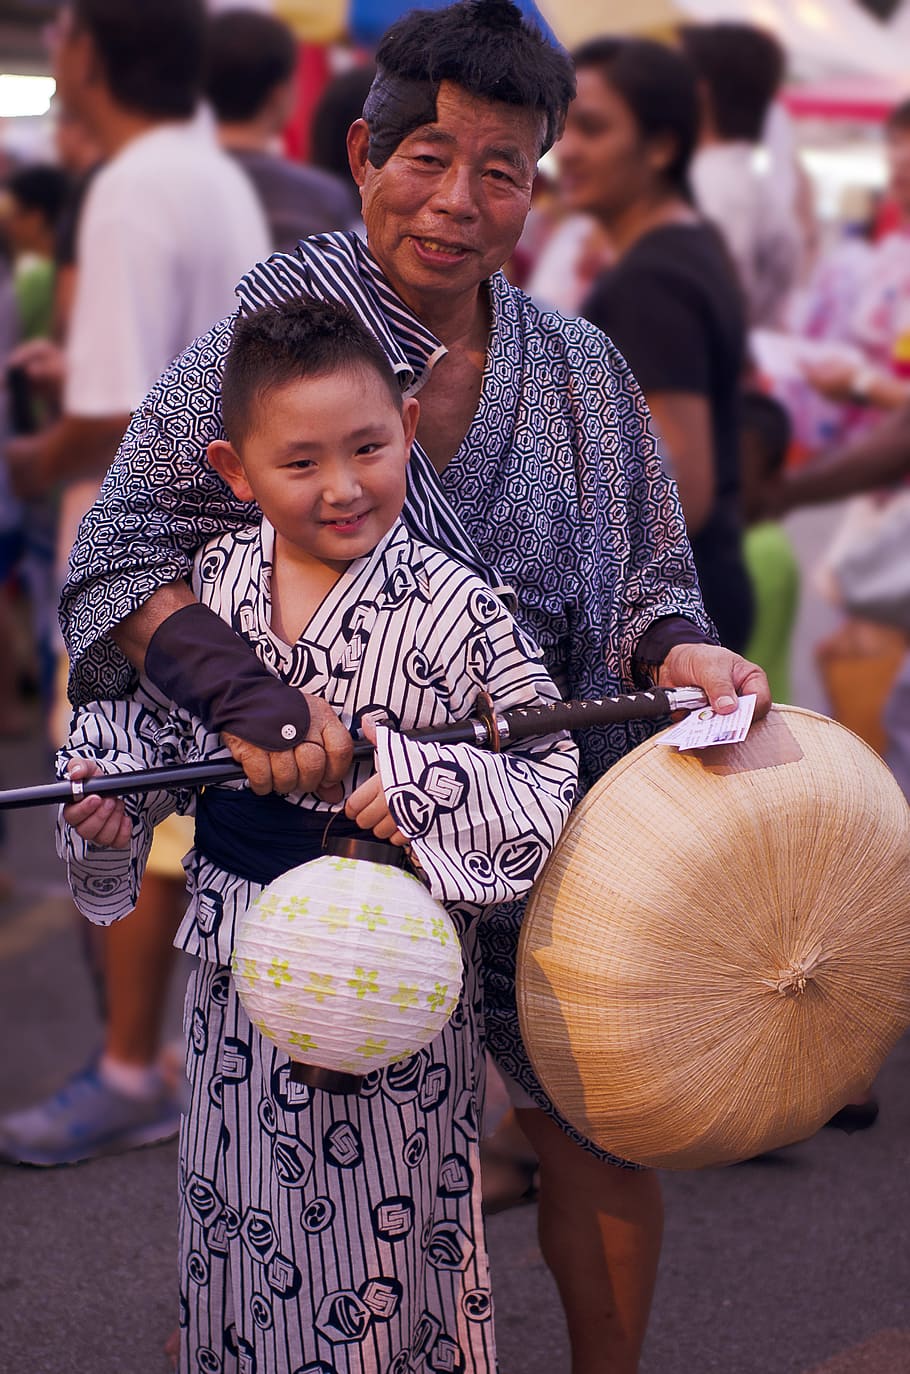 man holding hat and sword standing with boy during daytime, bon odori